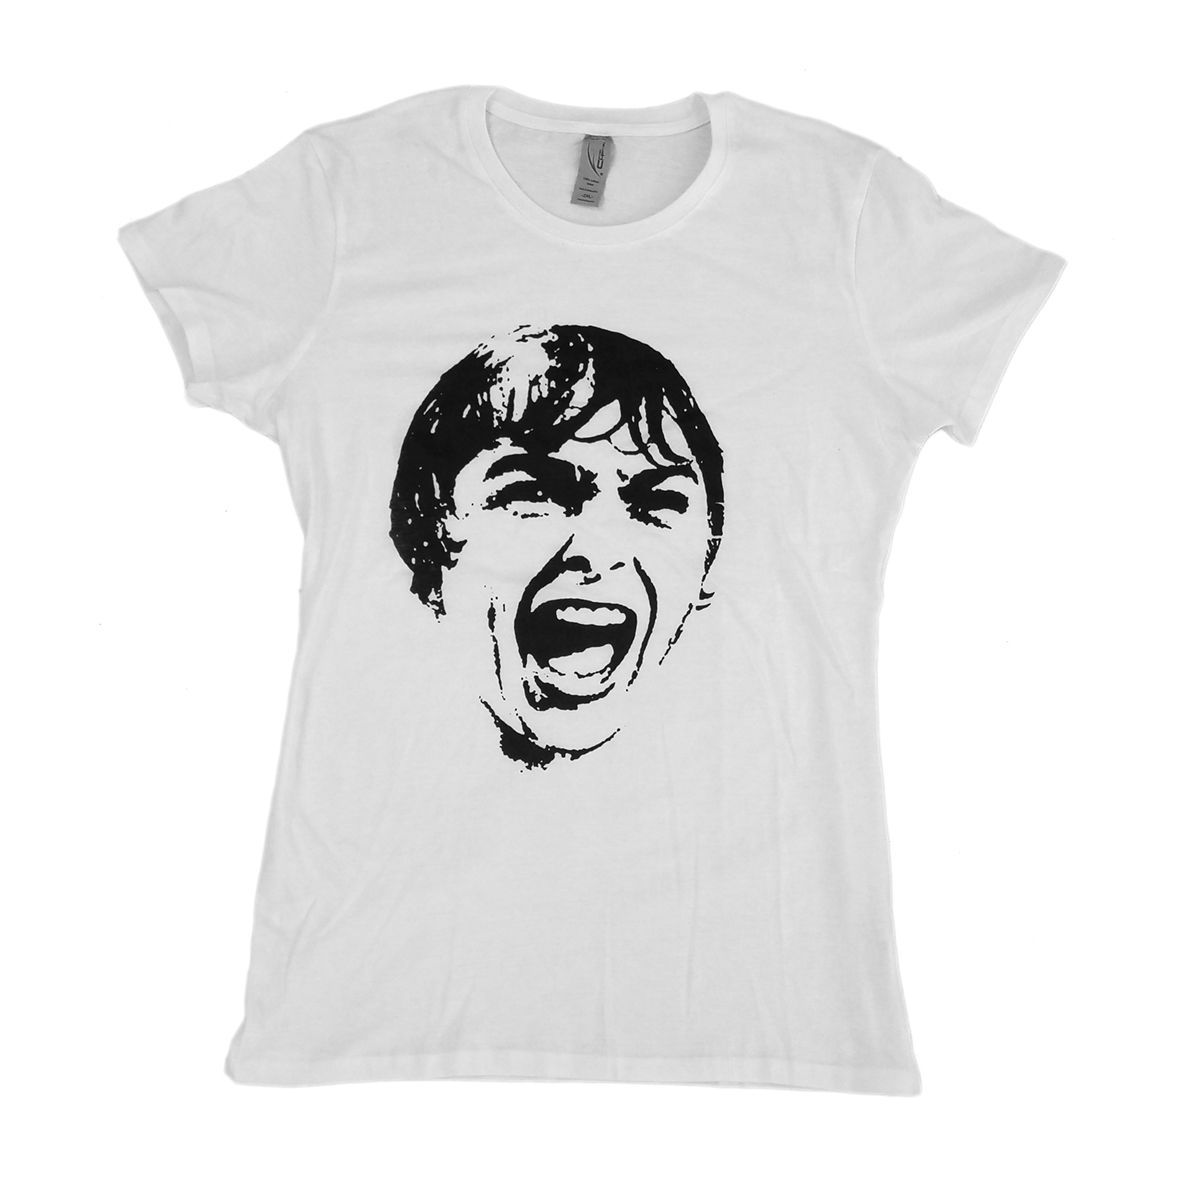 Screaming Janet Leigh - Psycho - Alfred Hitchcock - Women's 100% cotton t-shirt